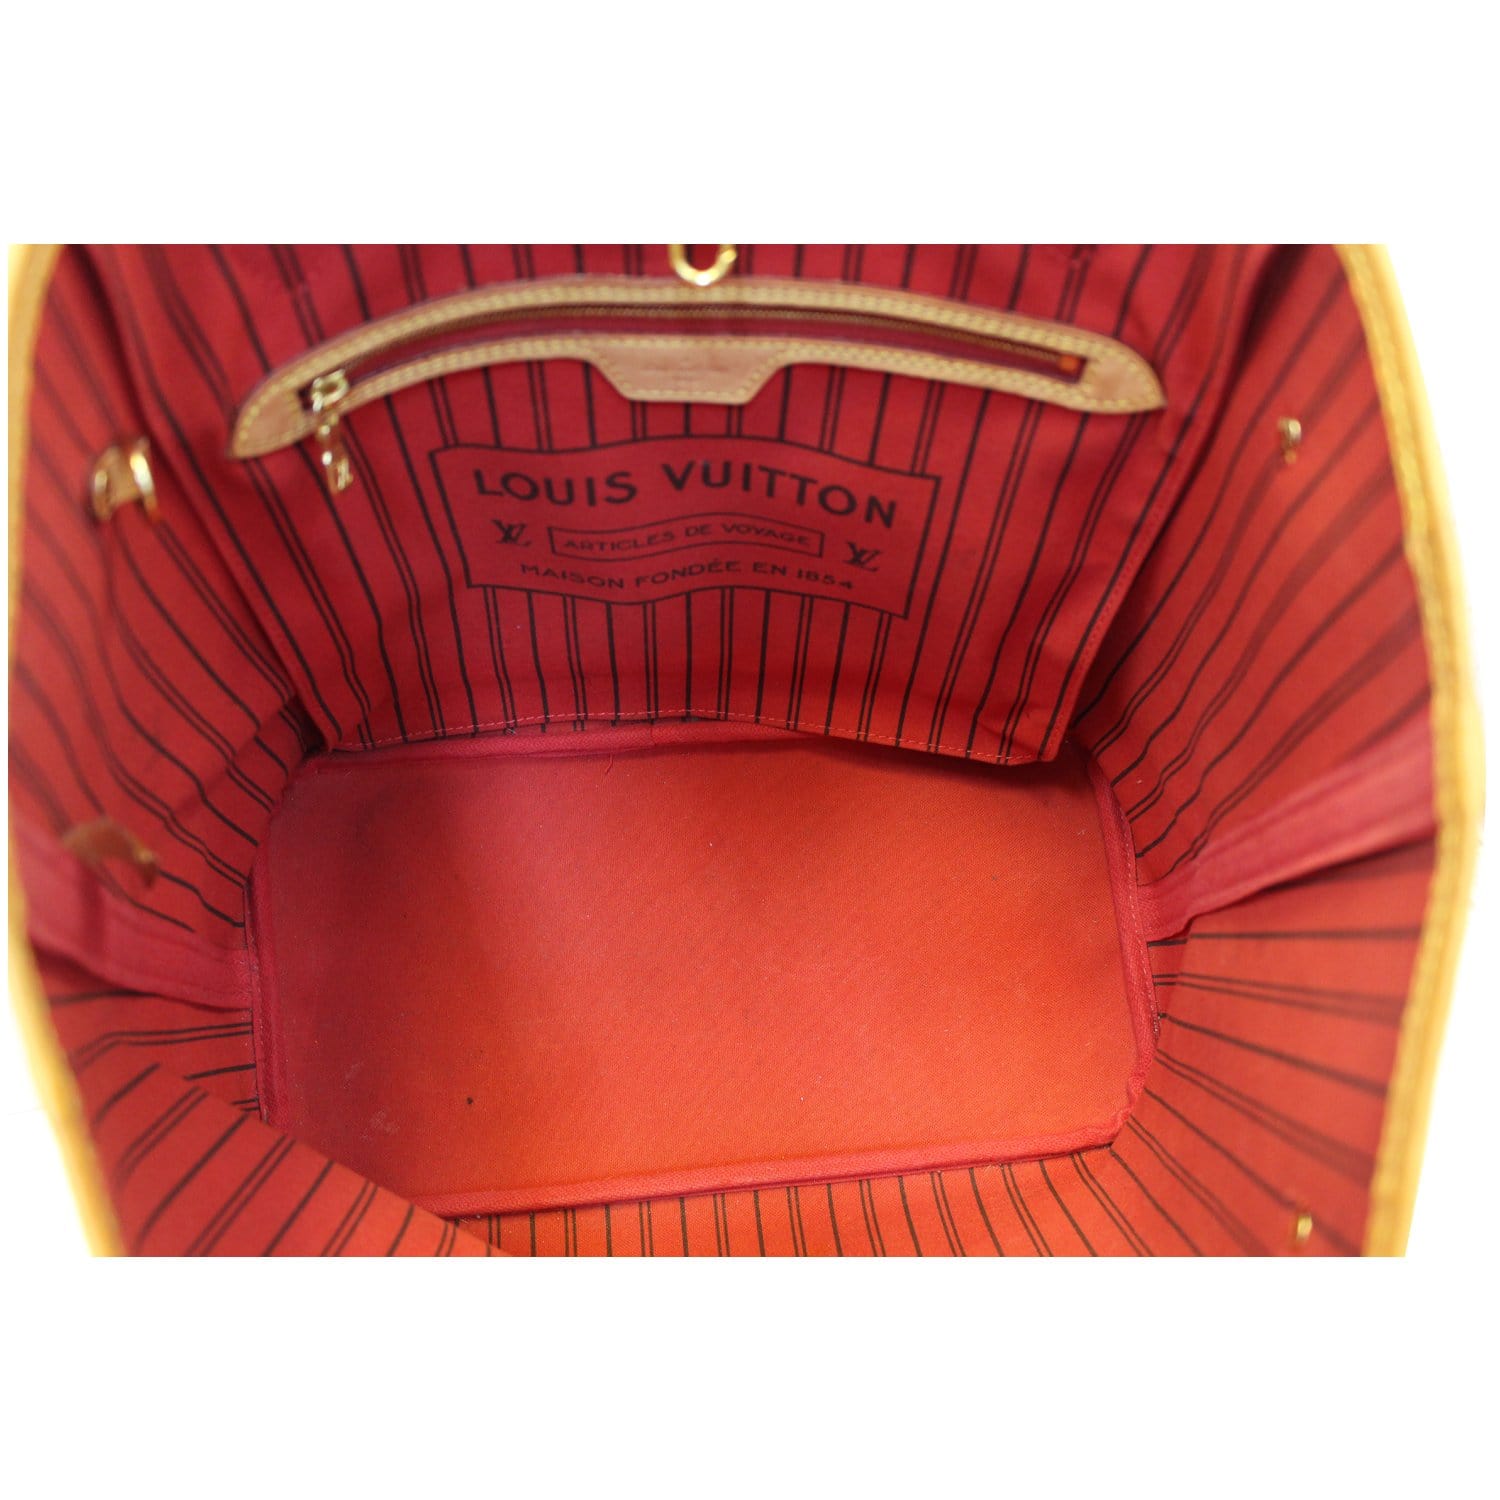 inside of louis vuitton tote bag